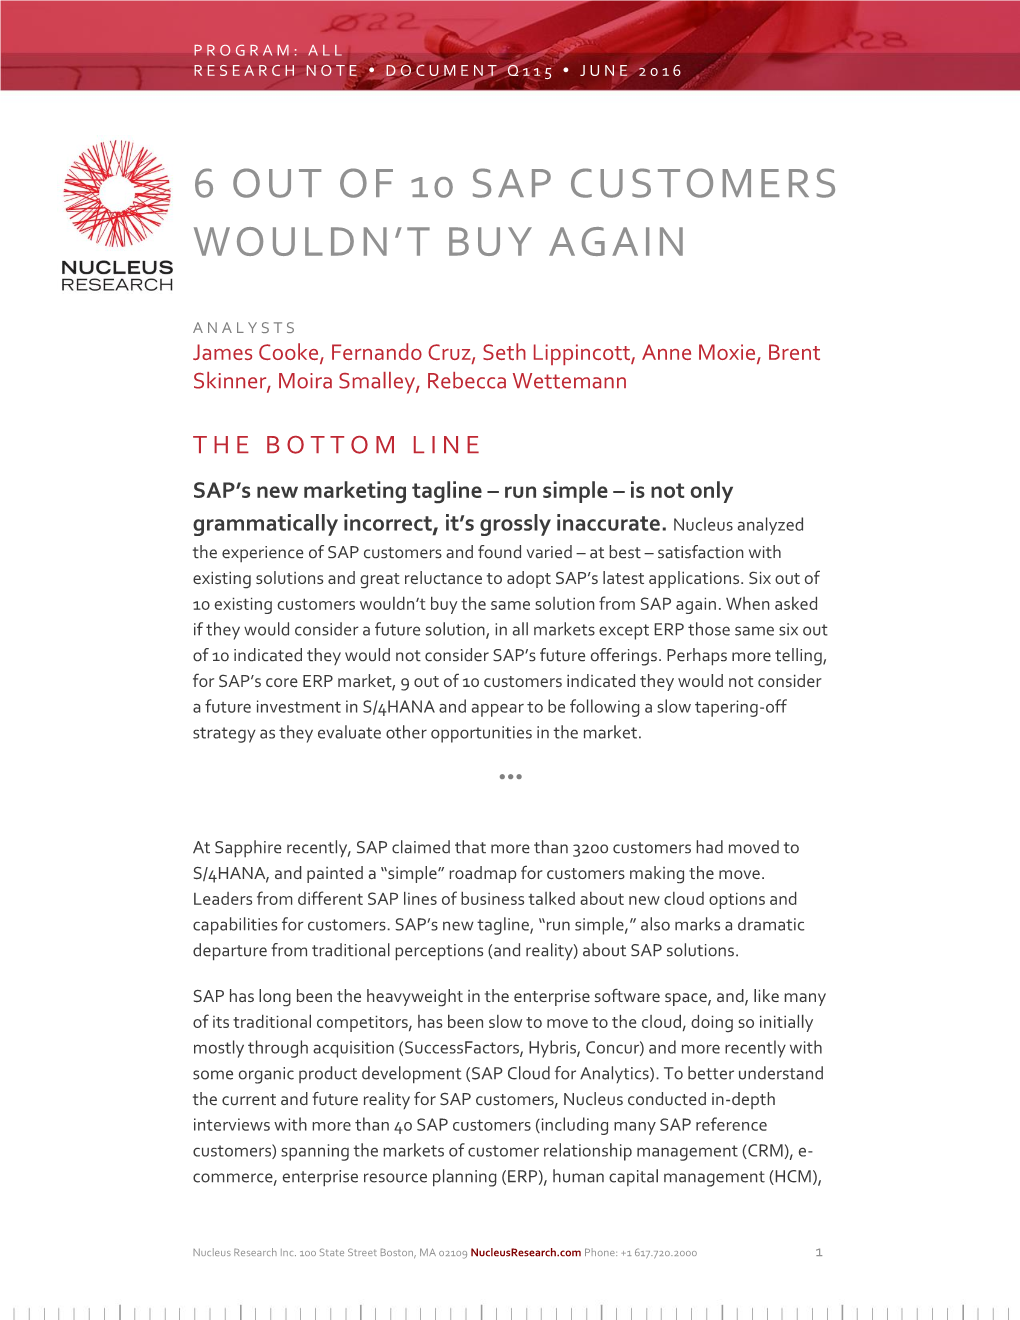 6 out of 10 Sap Customers Wouldn't Buy Again